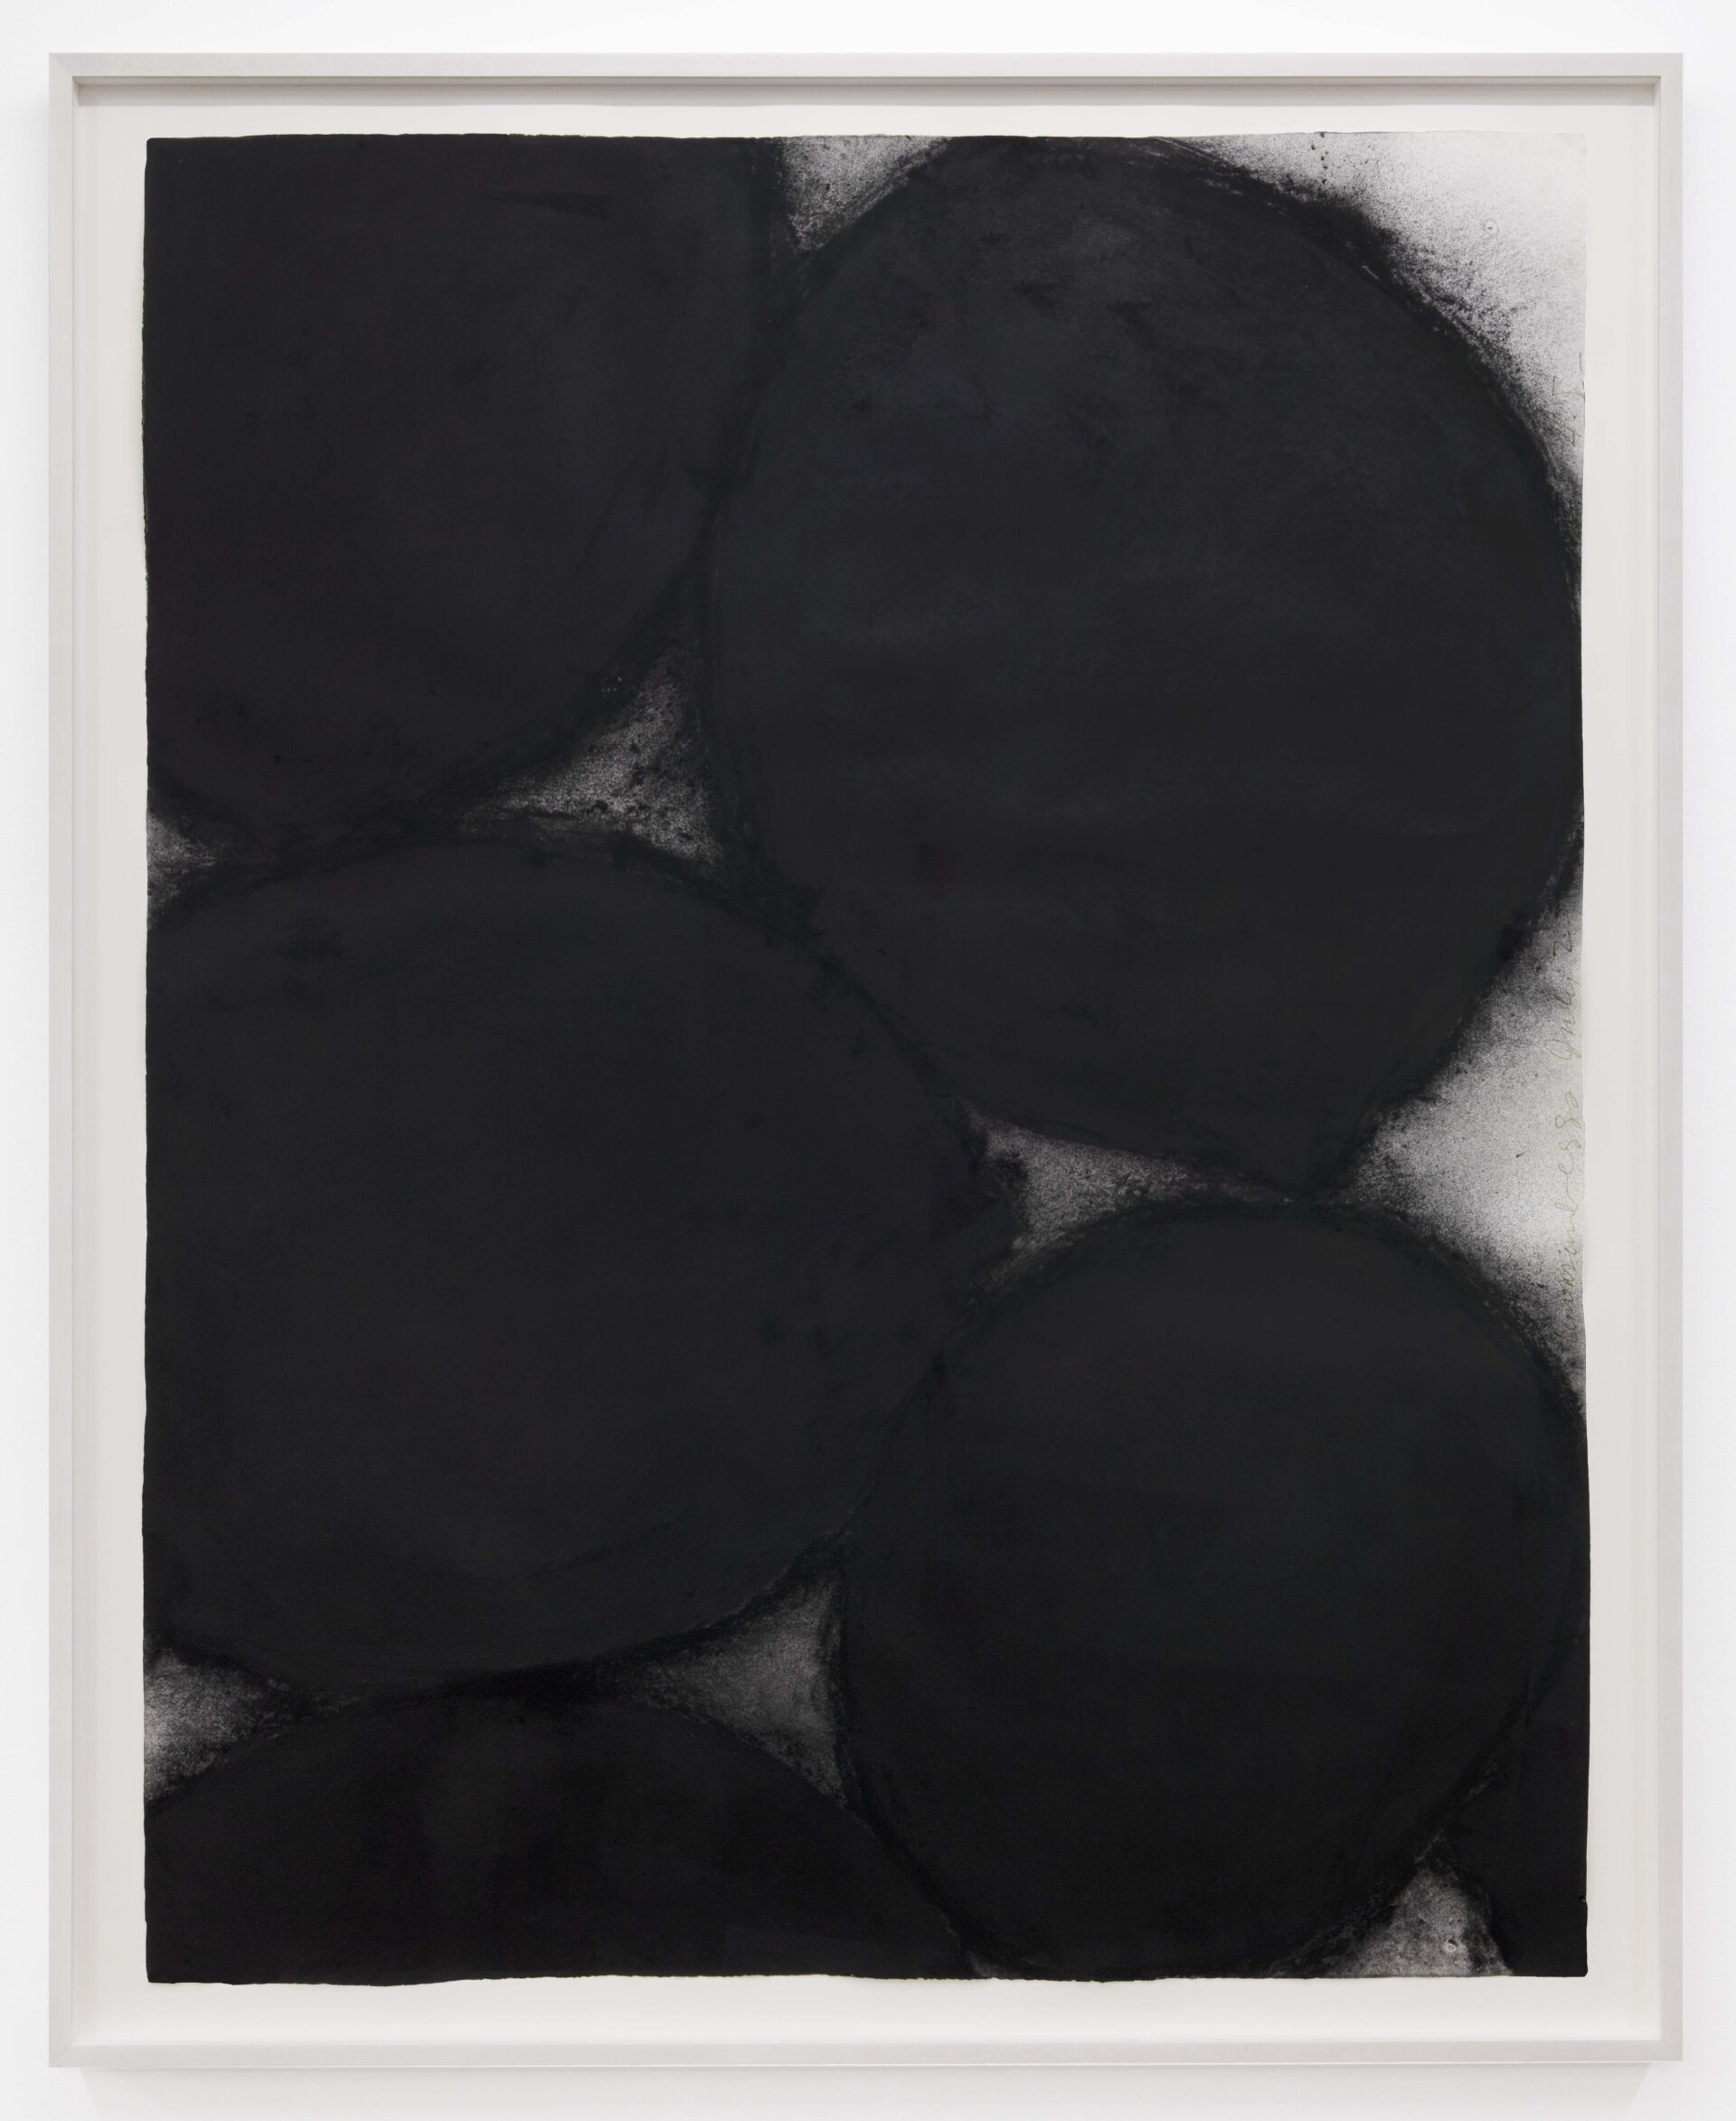 Donald Sultan Lemons and Eggs July 23, 1987, 1987 Charcoal on paper Image Dimensions: 60 3/4 x 47 1/2 inches (154.3 x 120.7 cm) Framed Dimensions: 65 1/2 x 53 1/2 x 2 1/4 inches (166.4 x 135.9 x 5.7 cm)